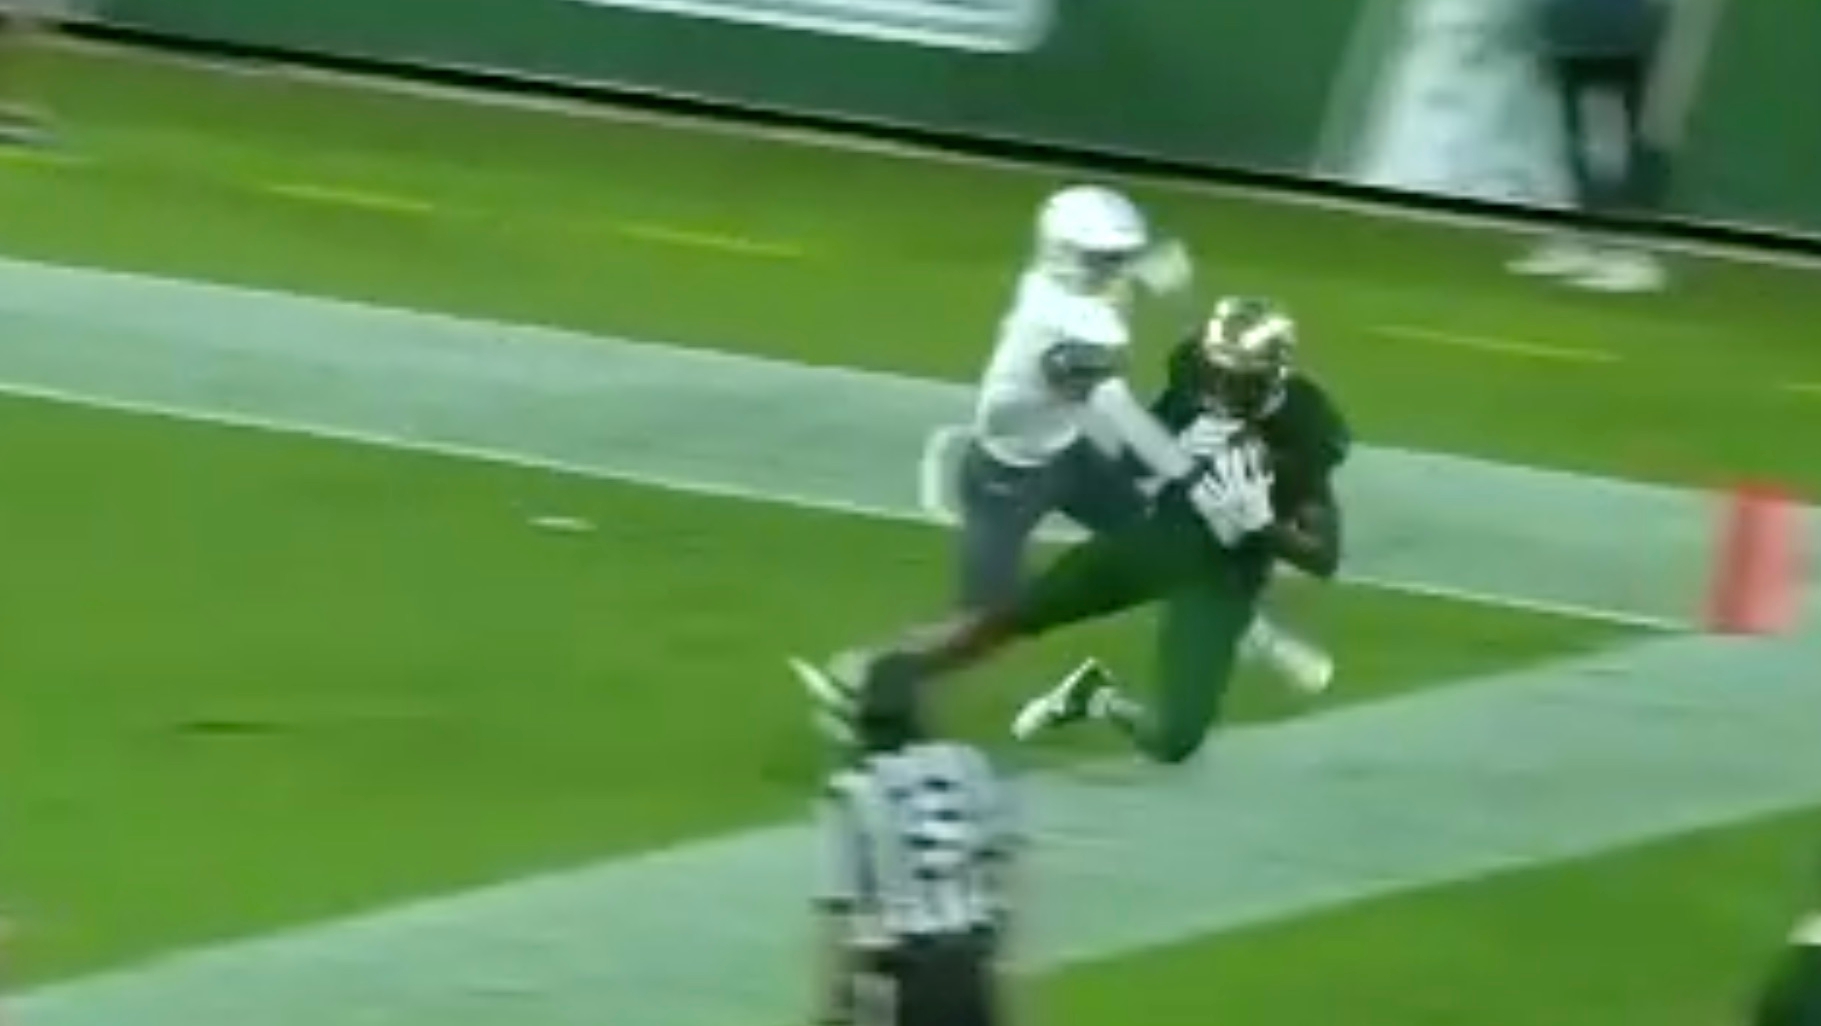 USF takes the lead on Dukes' TD grab